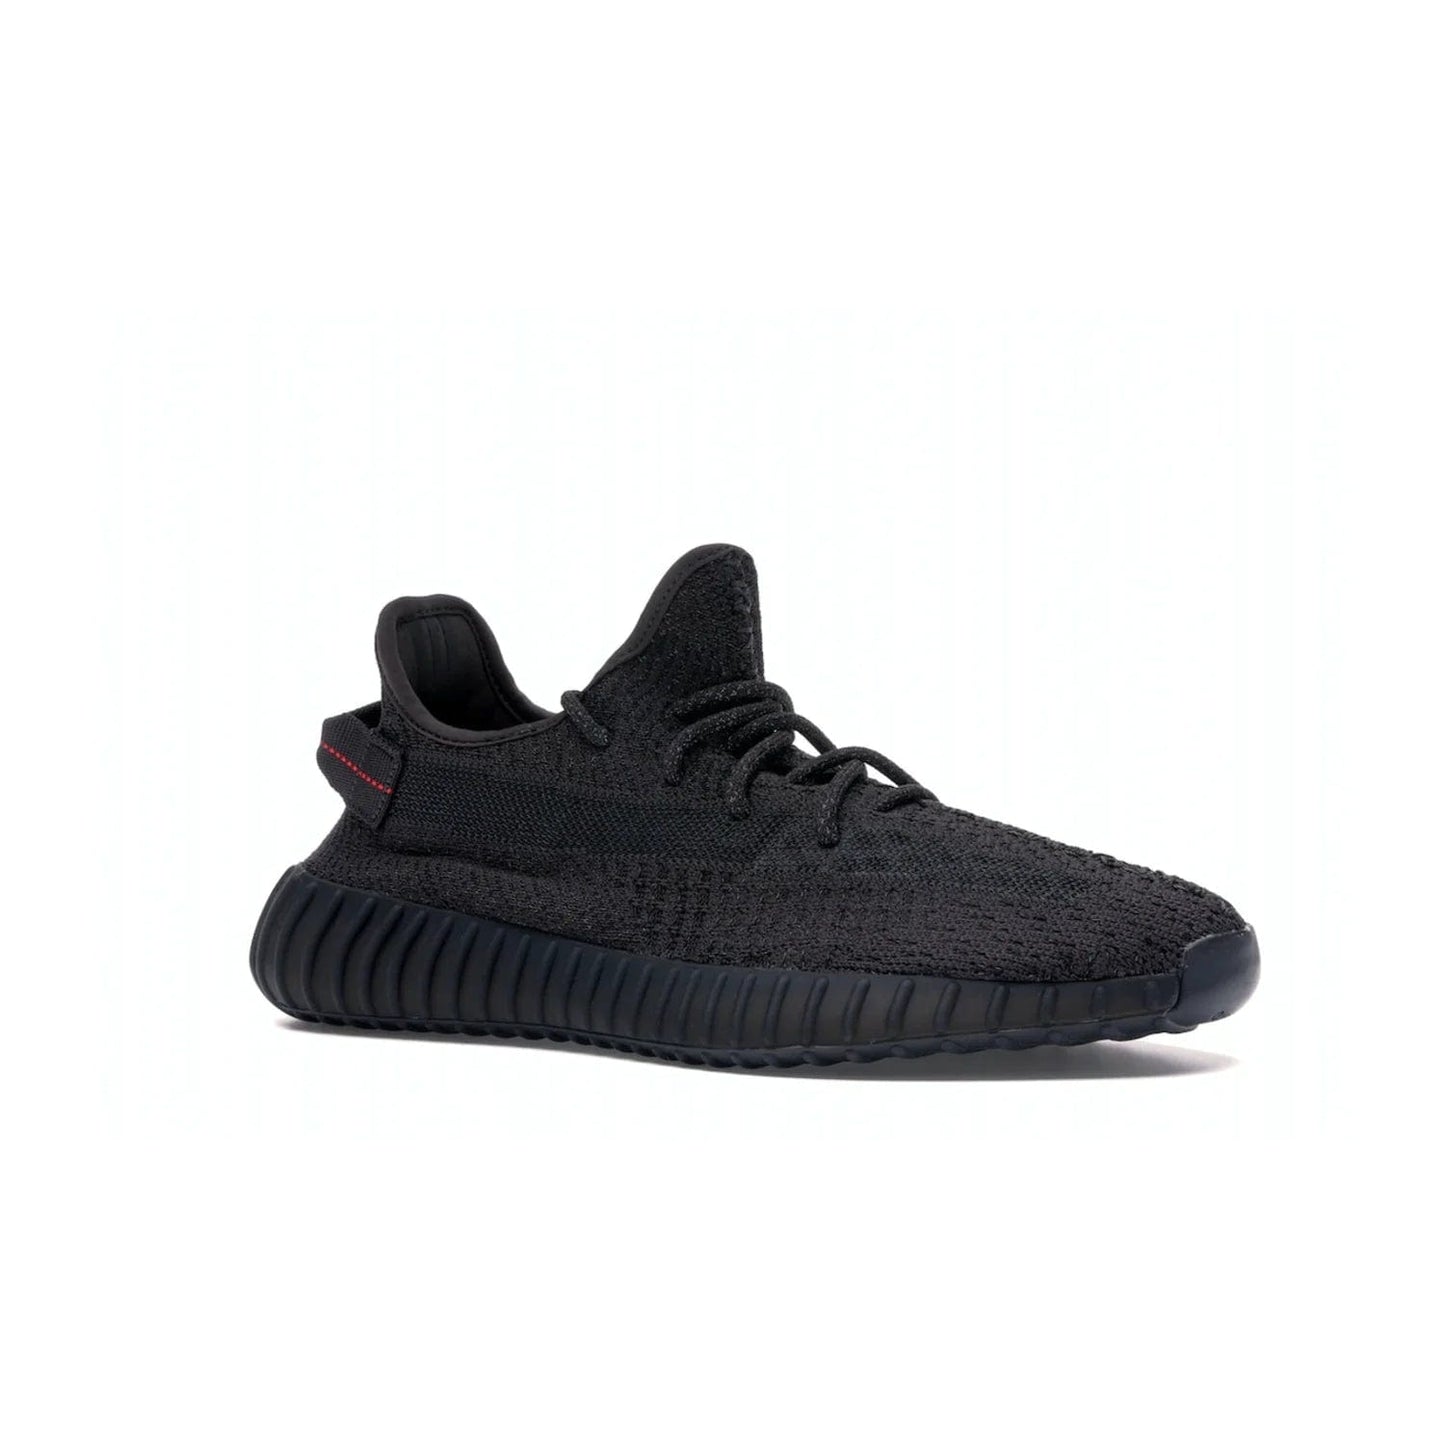 adidas Yeezy Boost 350 V2 Static Black (Reflective) - Image 4 - Only at www.BallersClubKickz.com - Make a statement with the adidas Yeezy Boost 350 V2 Static Black Reflective. All-black upper, reflective accents, midsole, and sole combine for a stylish look. High quality materials. June 2019 release. Add to your collection today.